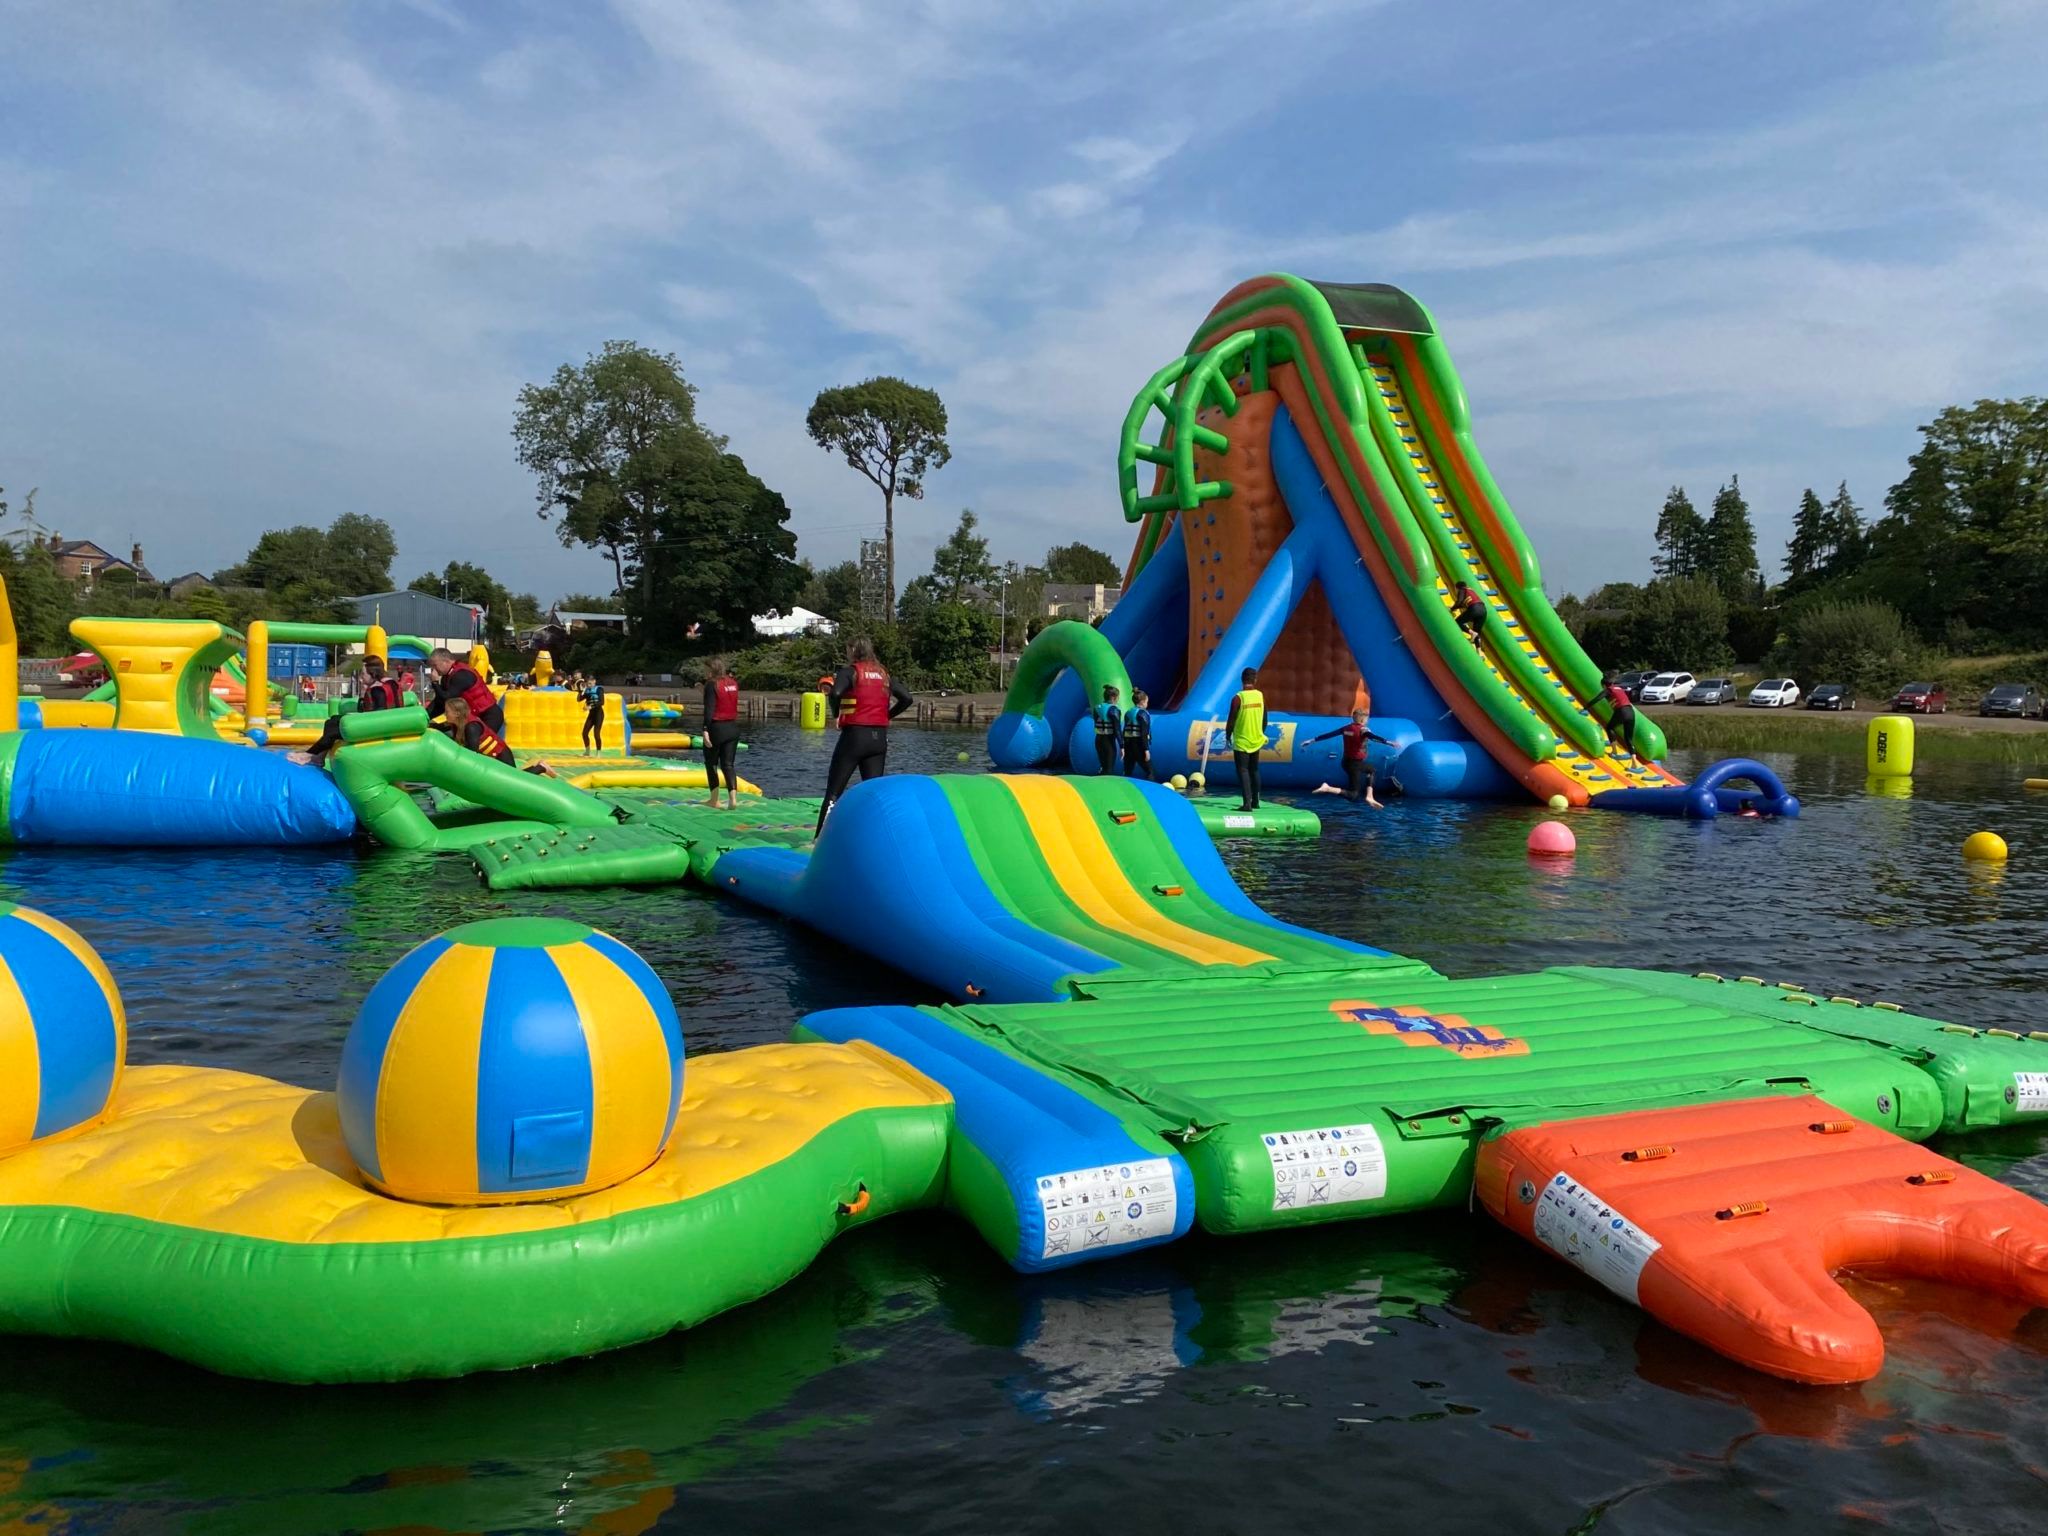 Planning a staycation in Northern Ireland? This water park on a lake is an absolute must